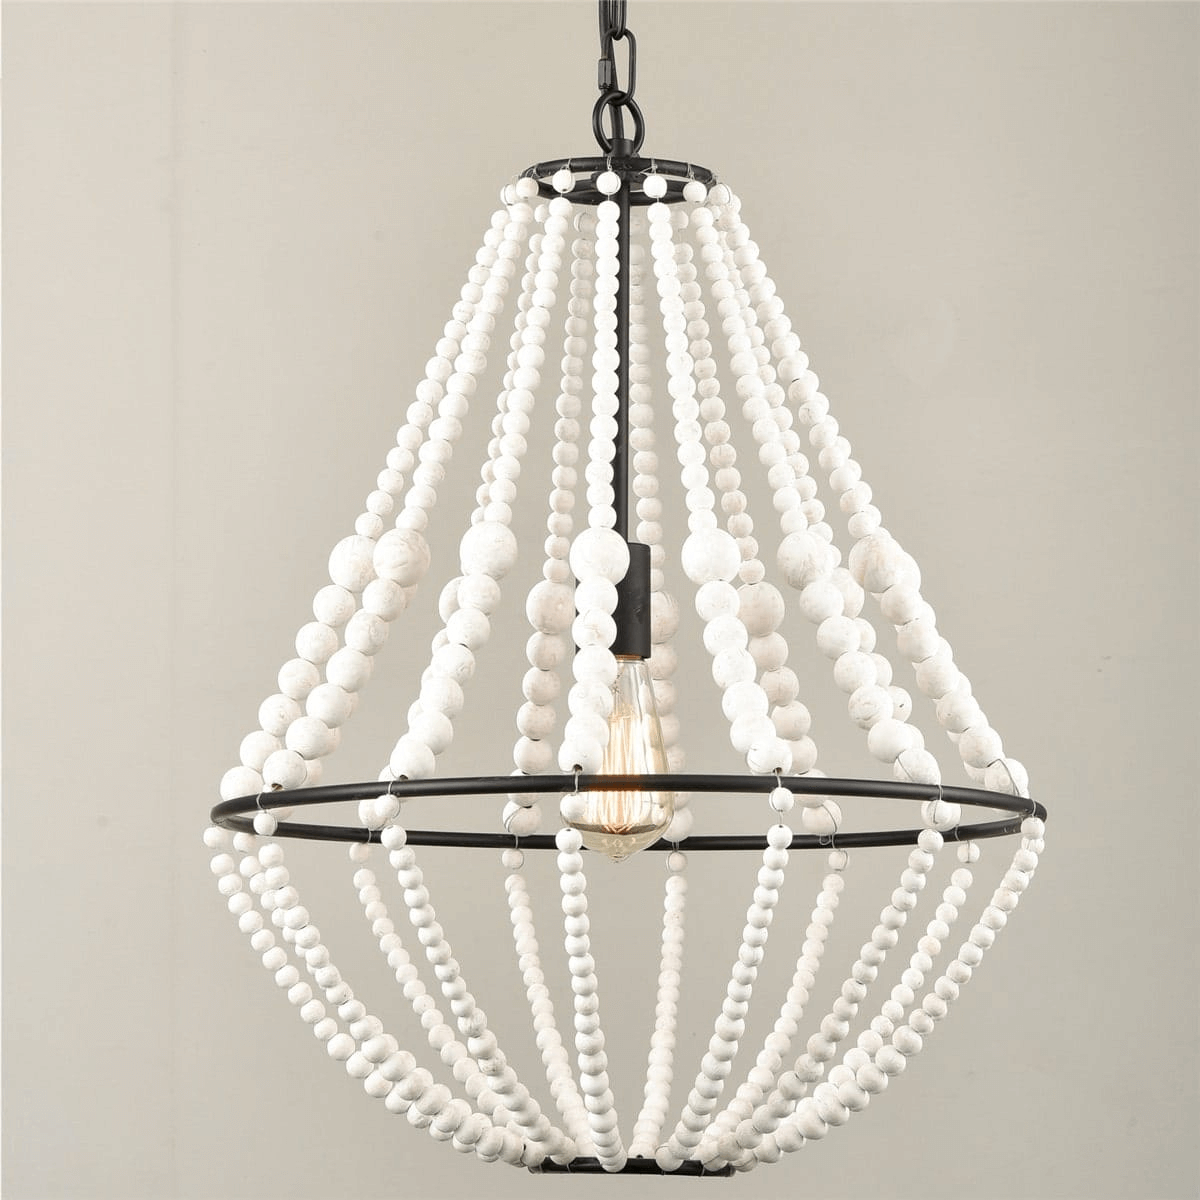 Distressed Off-White Rustic Wood Beaded Chandelier